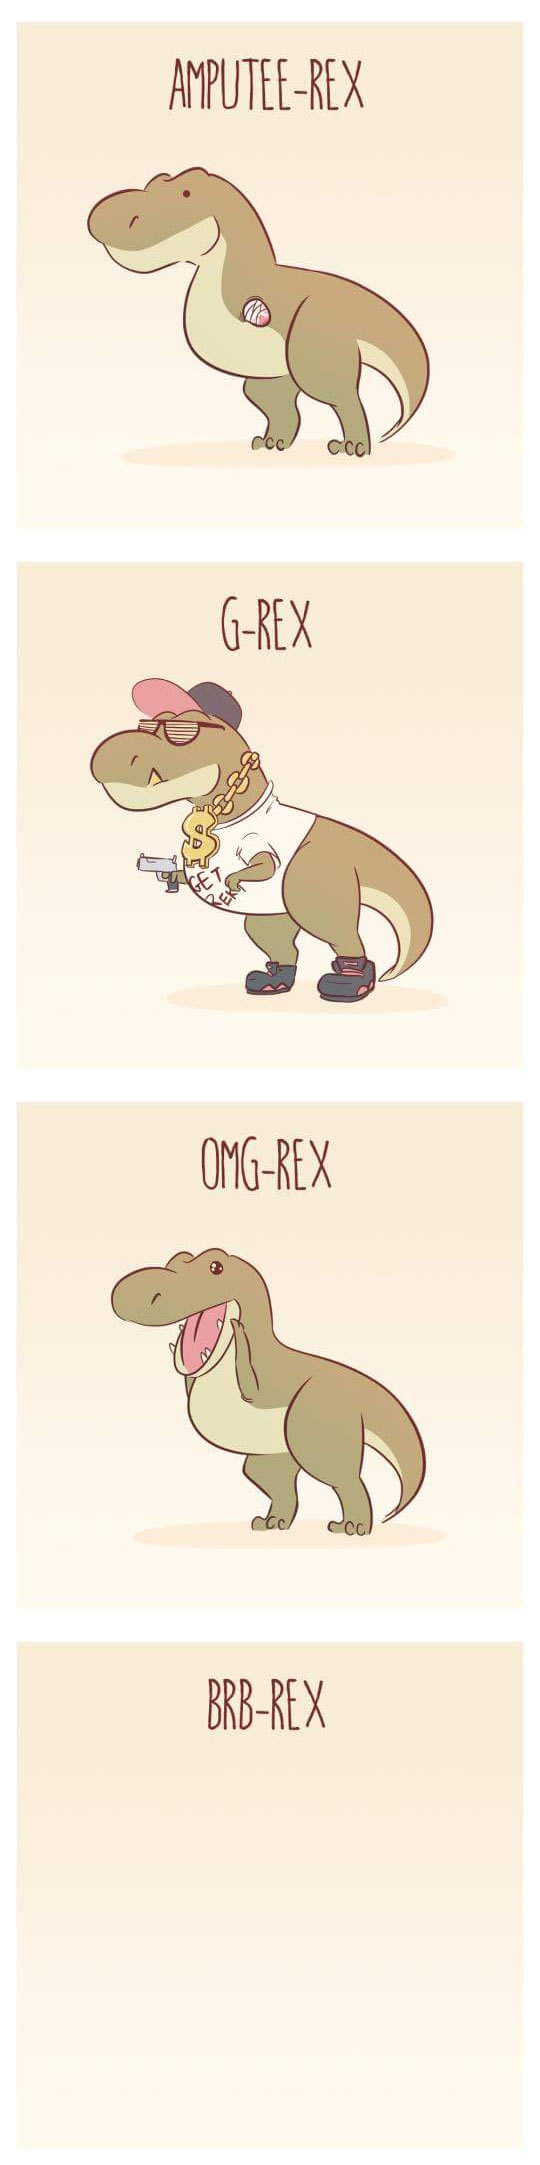 2funny-t-rex-expert-guide-illustrated-gangster